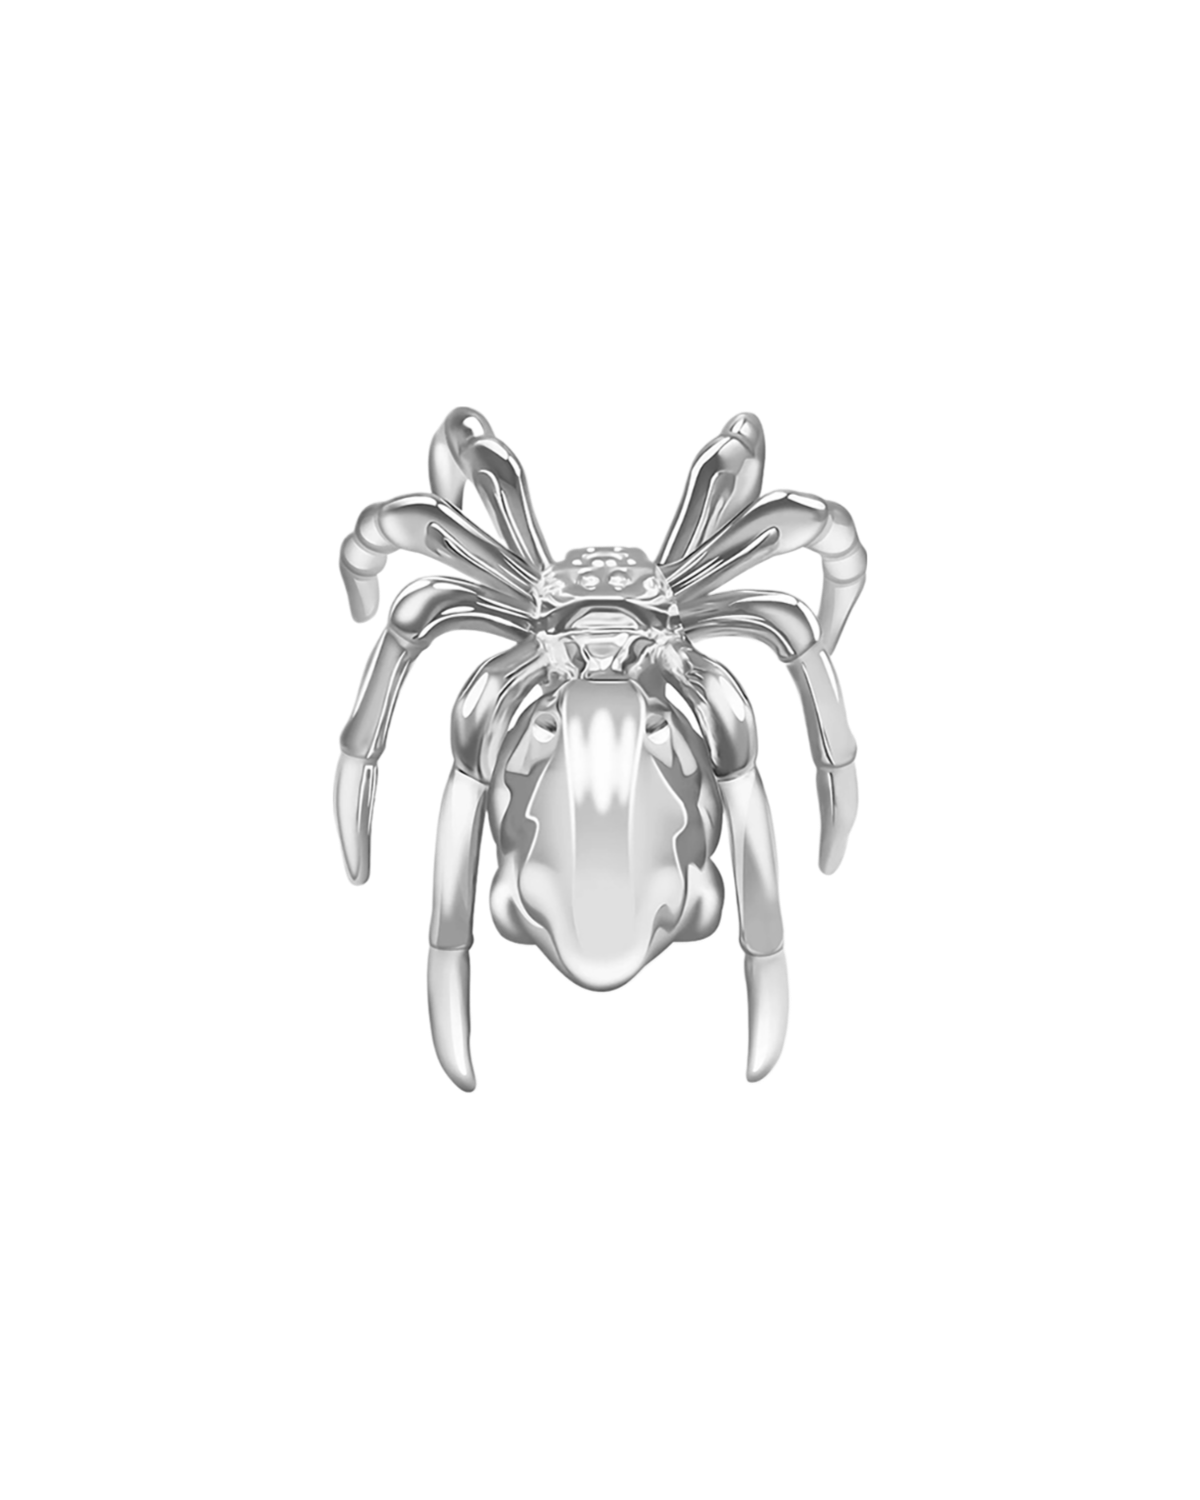 Bad Binch Silver Plated Spider Rings